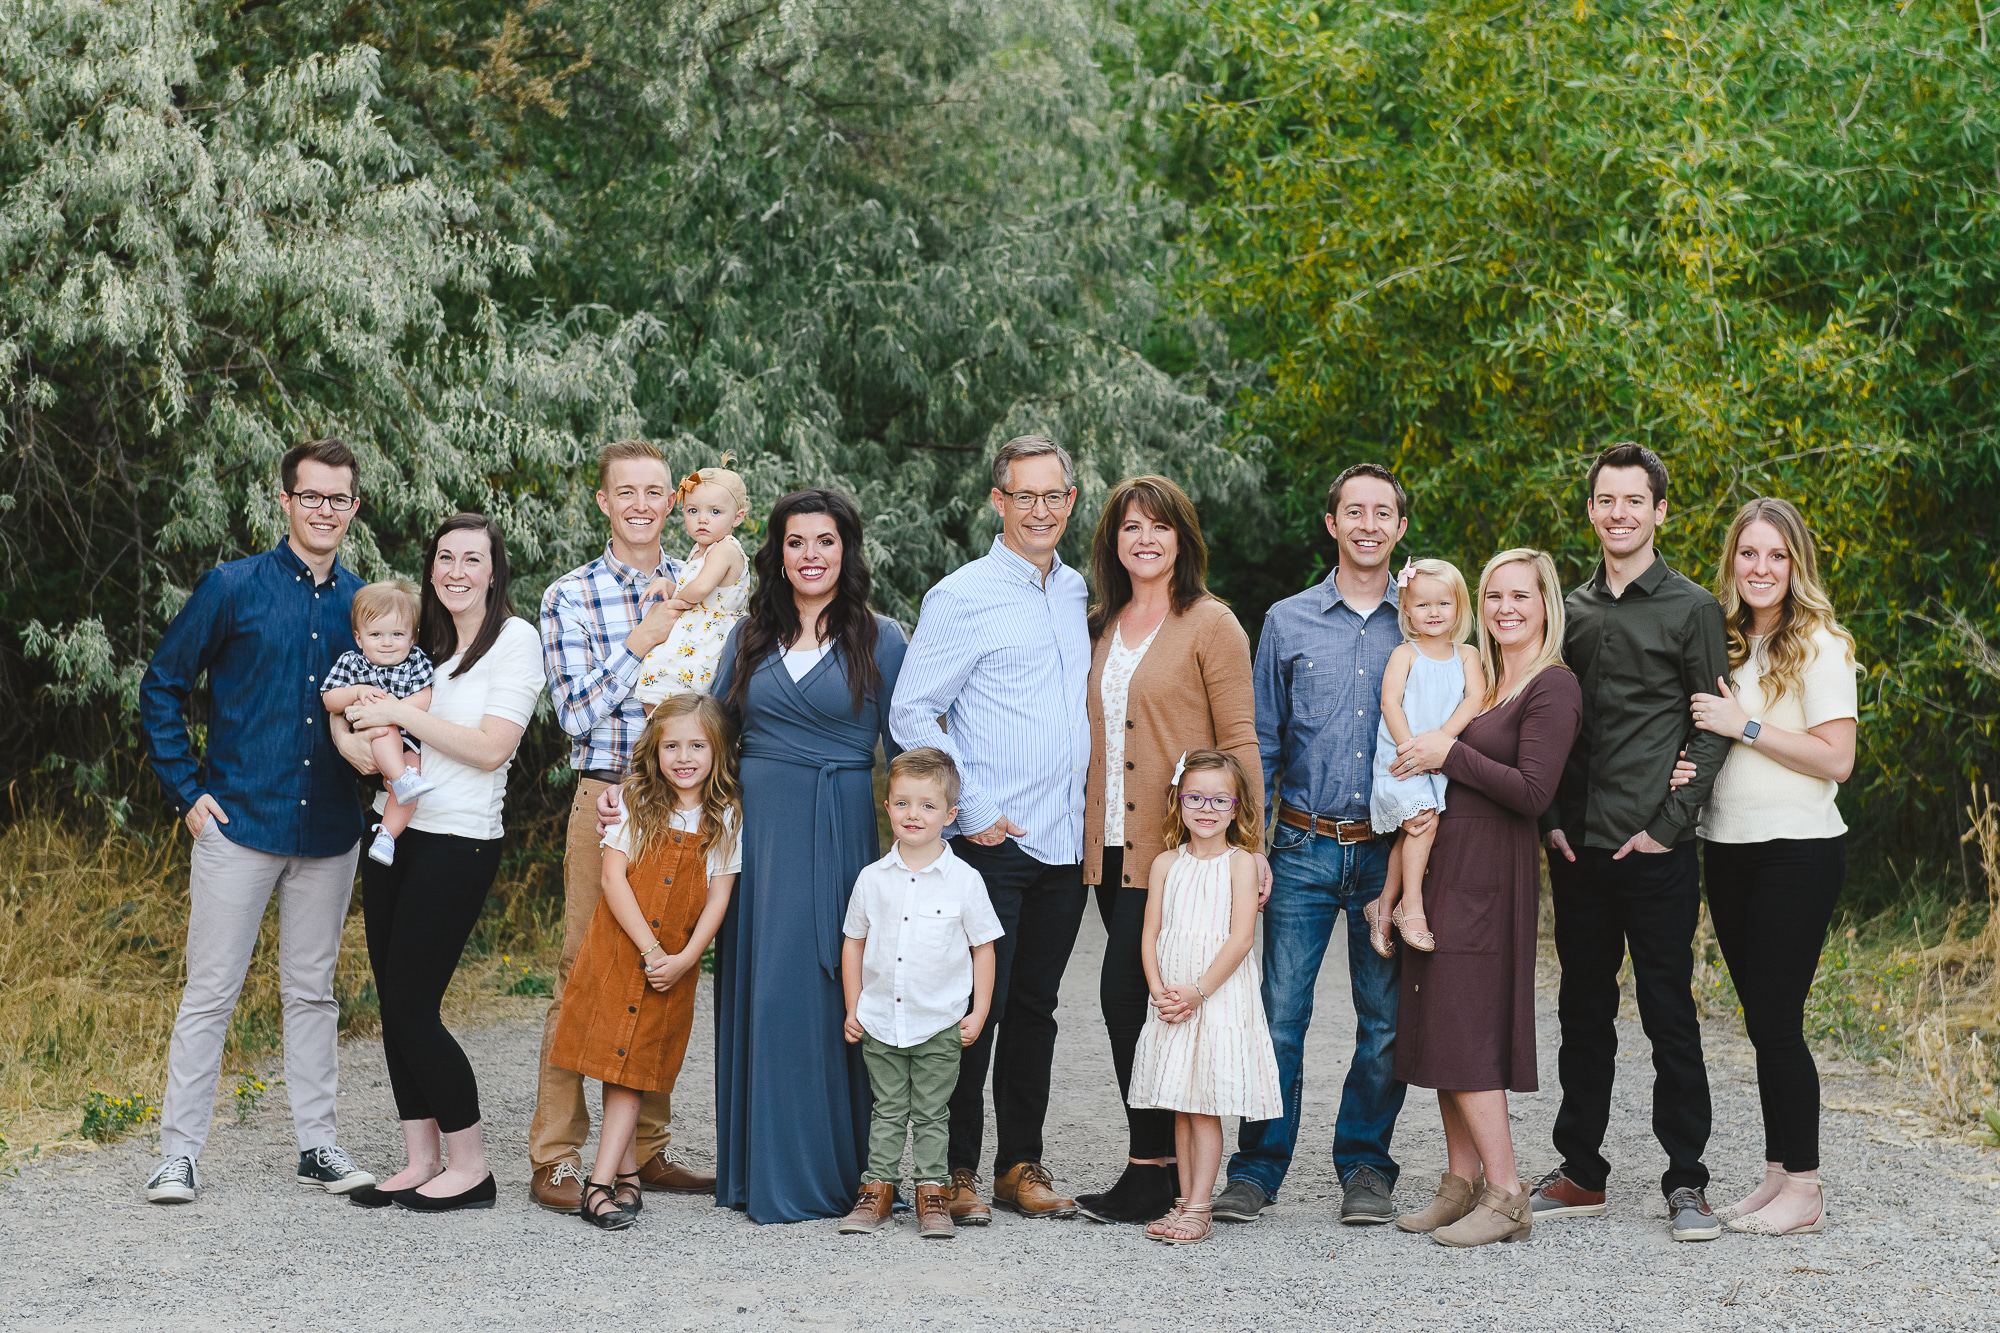 Extended Family Pictures 101 Here are 6 things that will make the